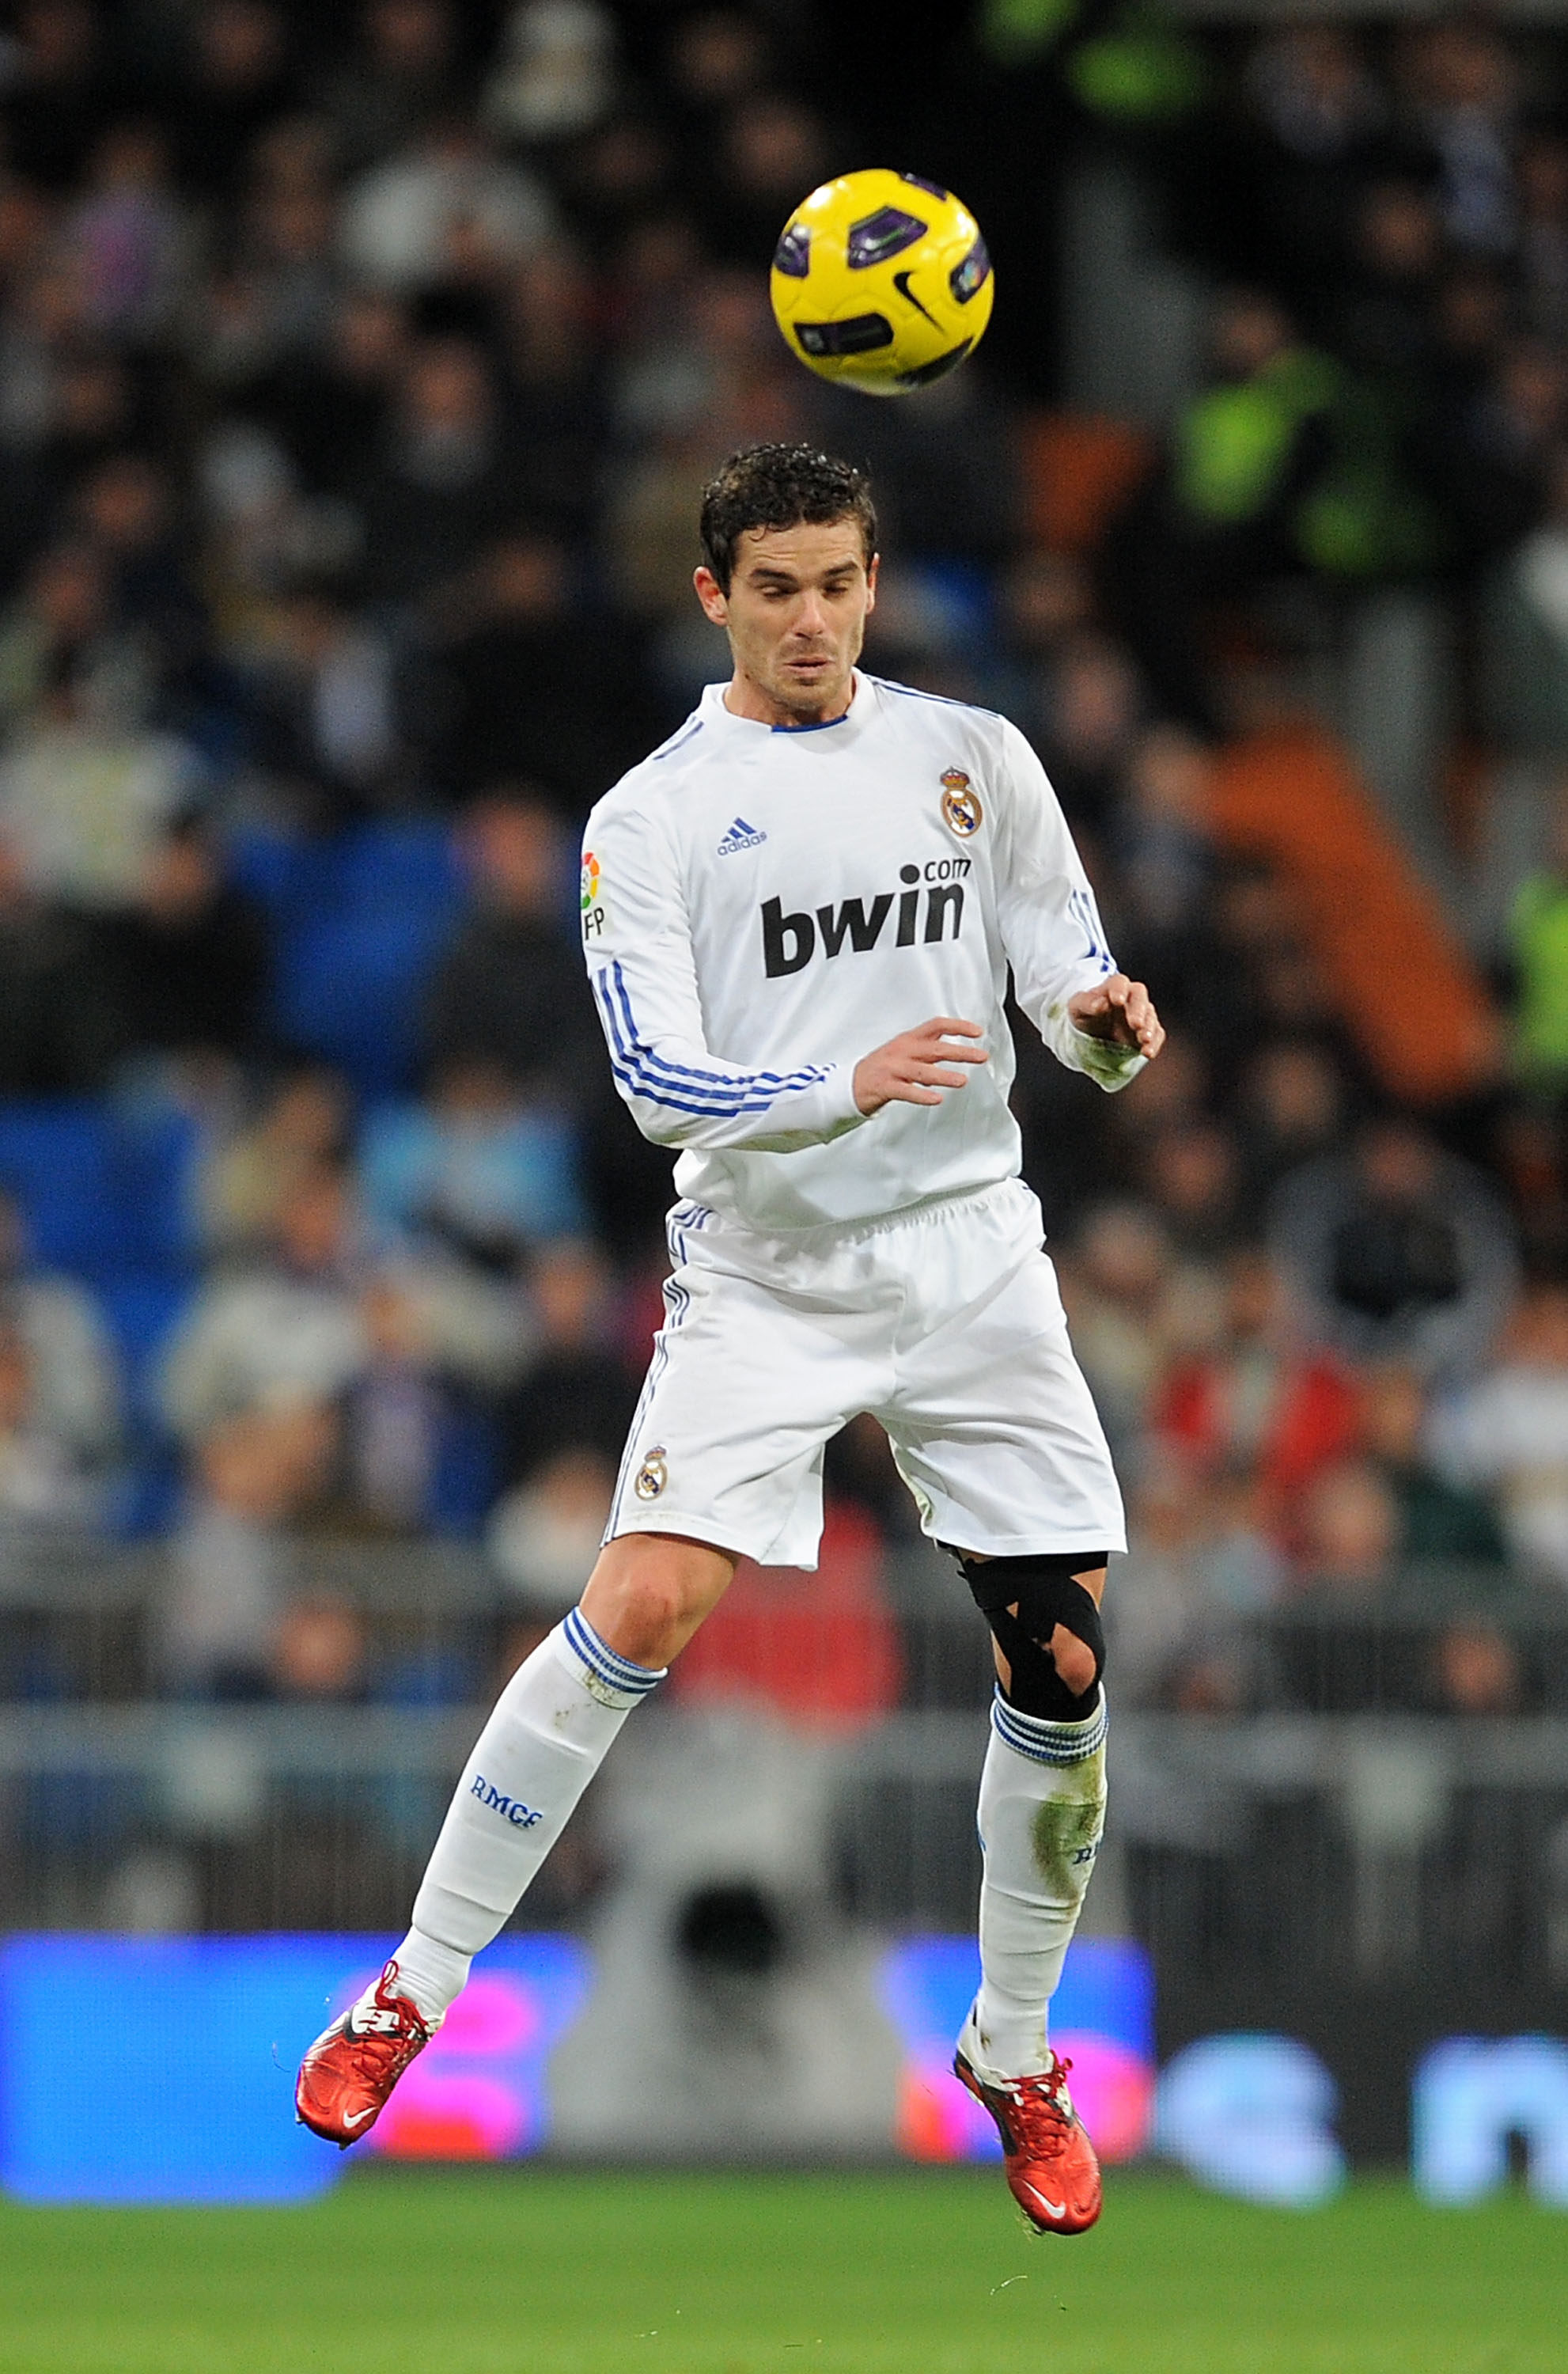 MADRID, SPAIN - JANUARY 23: Fernando Gago of Real Madrid heads the ball during the La Liga match between Real Madrid and Mallorca at Estadio Santiago Bernabeu on January 23, 2011 in Madrid, Spain.  (Photo by Denis Doyle/Getty Images)